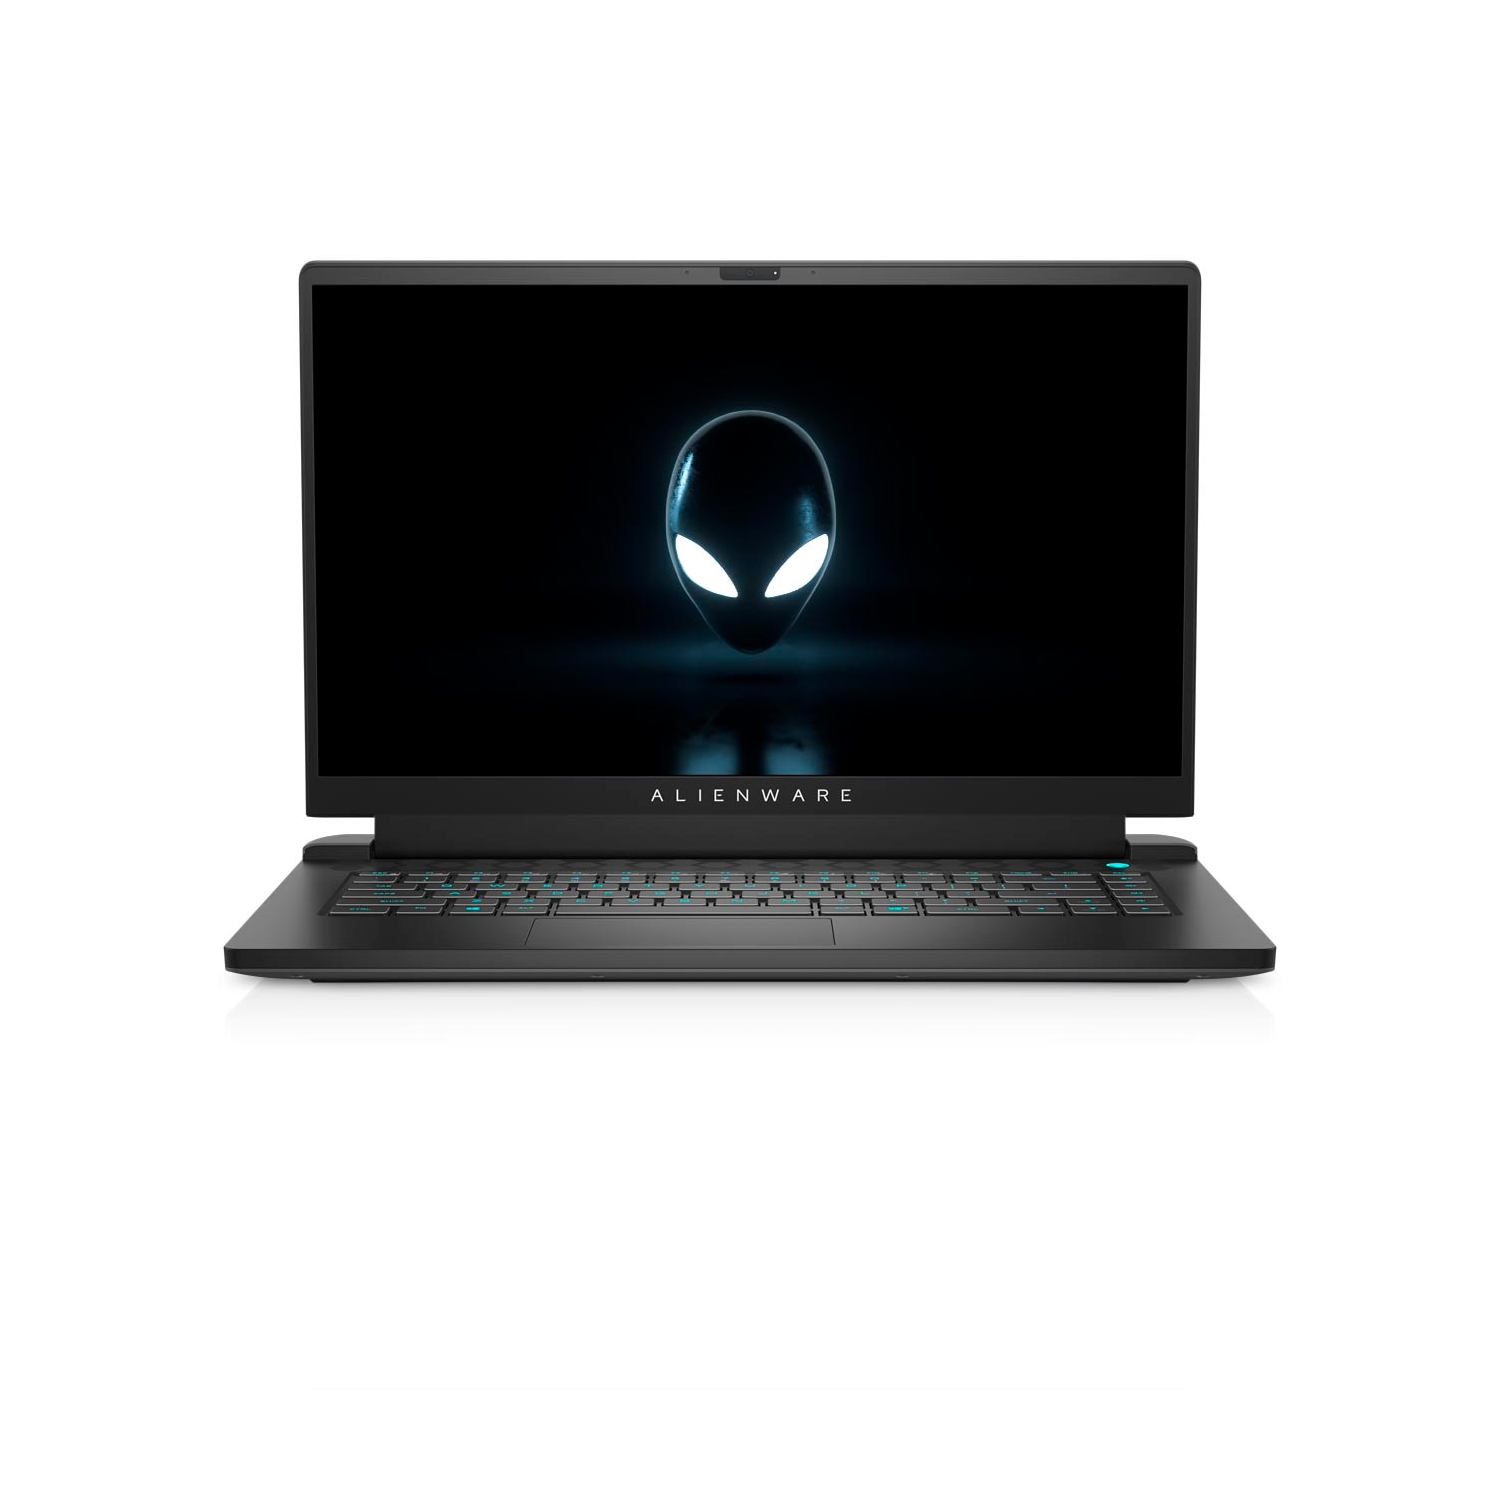 Refurbished (Excellent) - Dell Alienware m15 R5 Ryzen Edition Gaming Laptop (2021), 15.6" QHD, Core Ryzen 7, 512GB SSD, 16GB RAM, RTX 3070, 8 Cores @ 4.4 GHz Certified